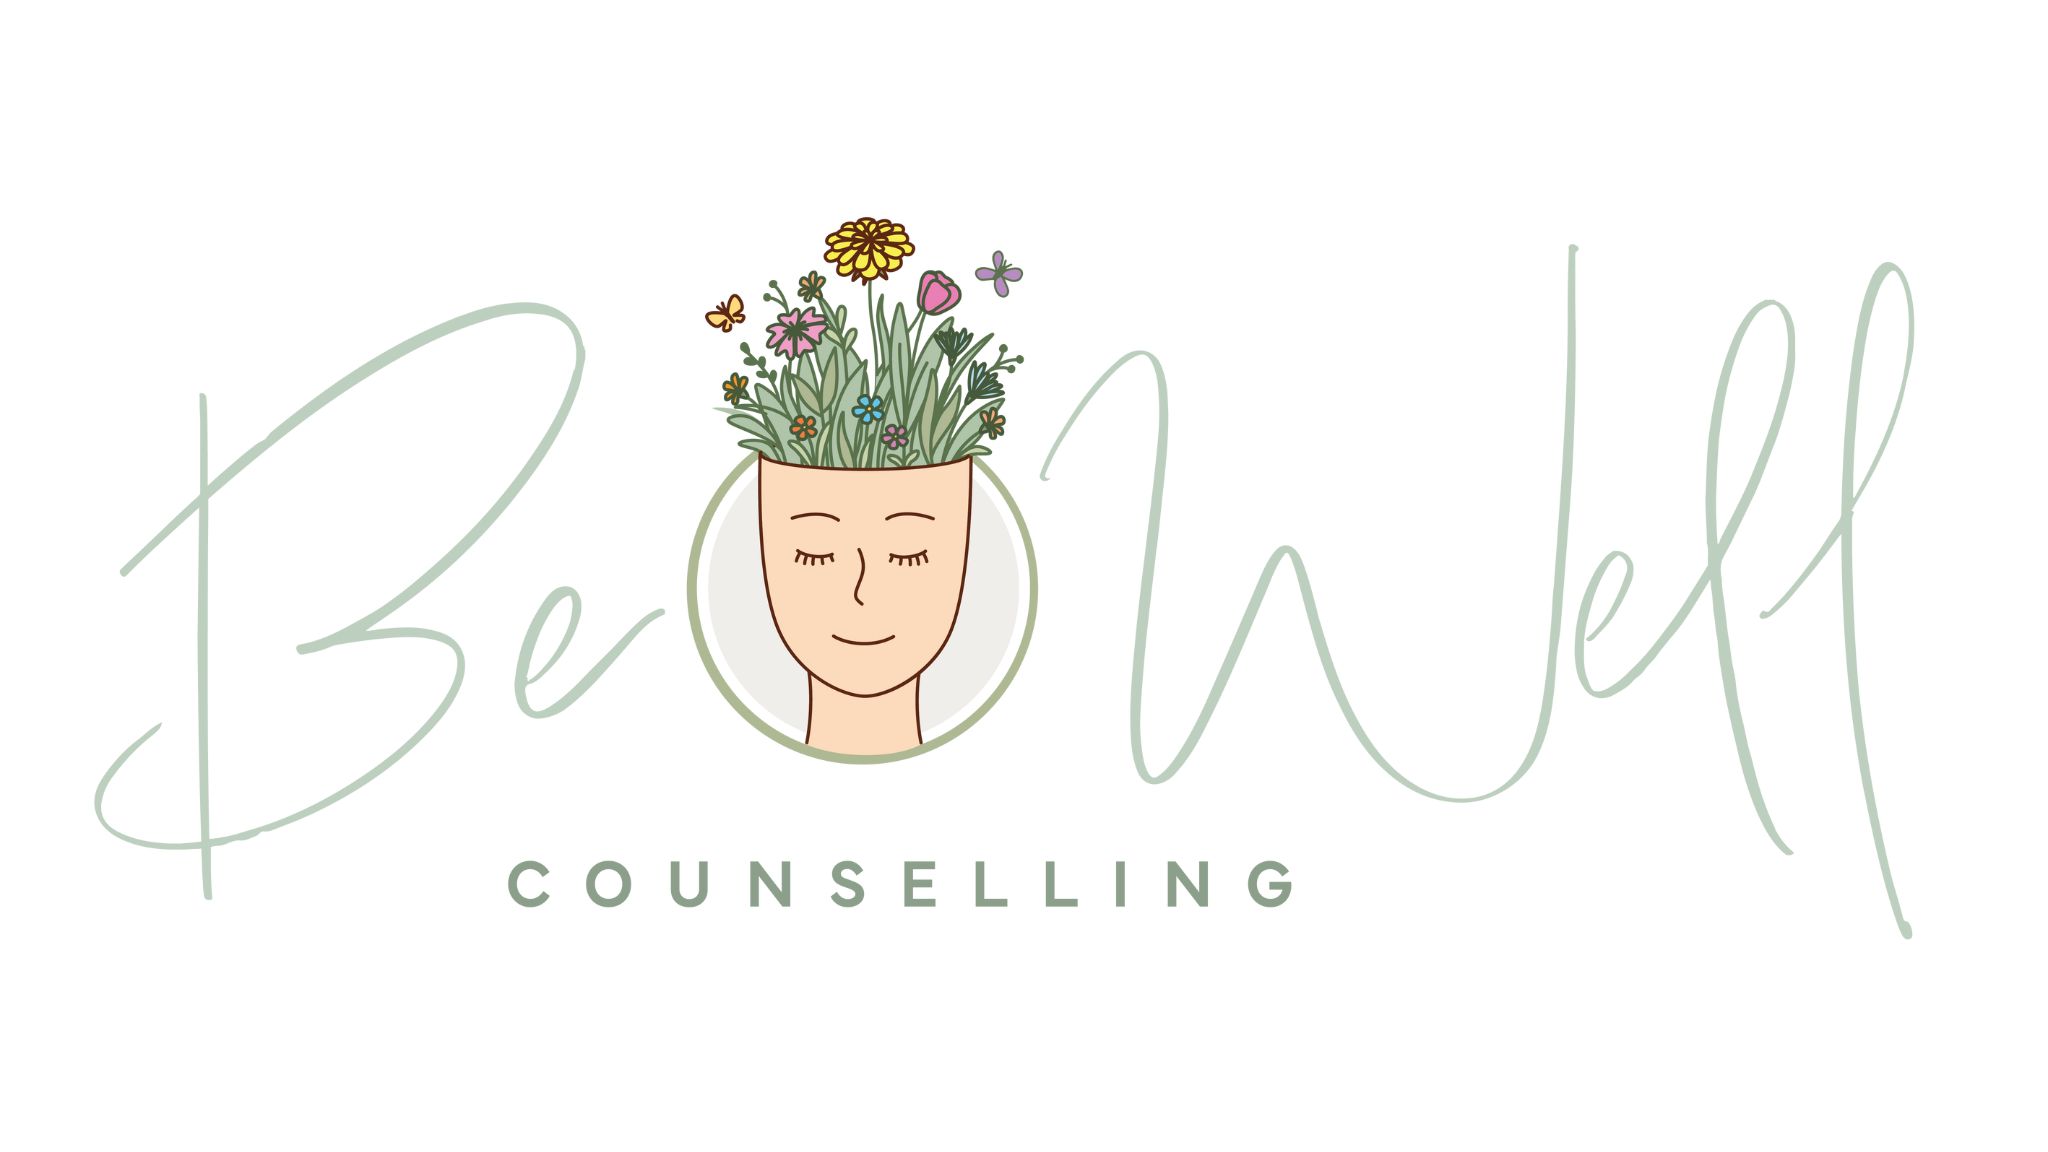 Be Well Counselling